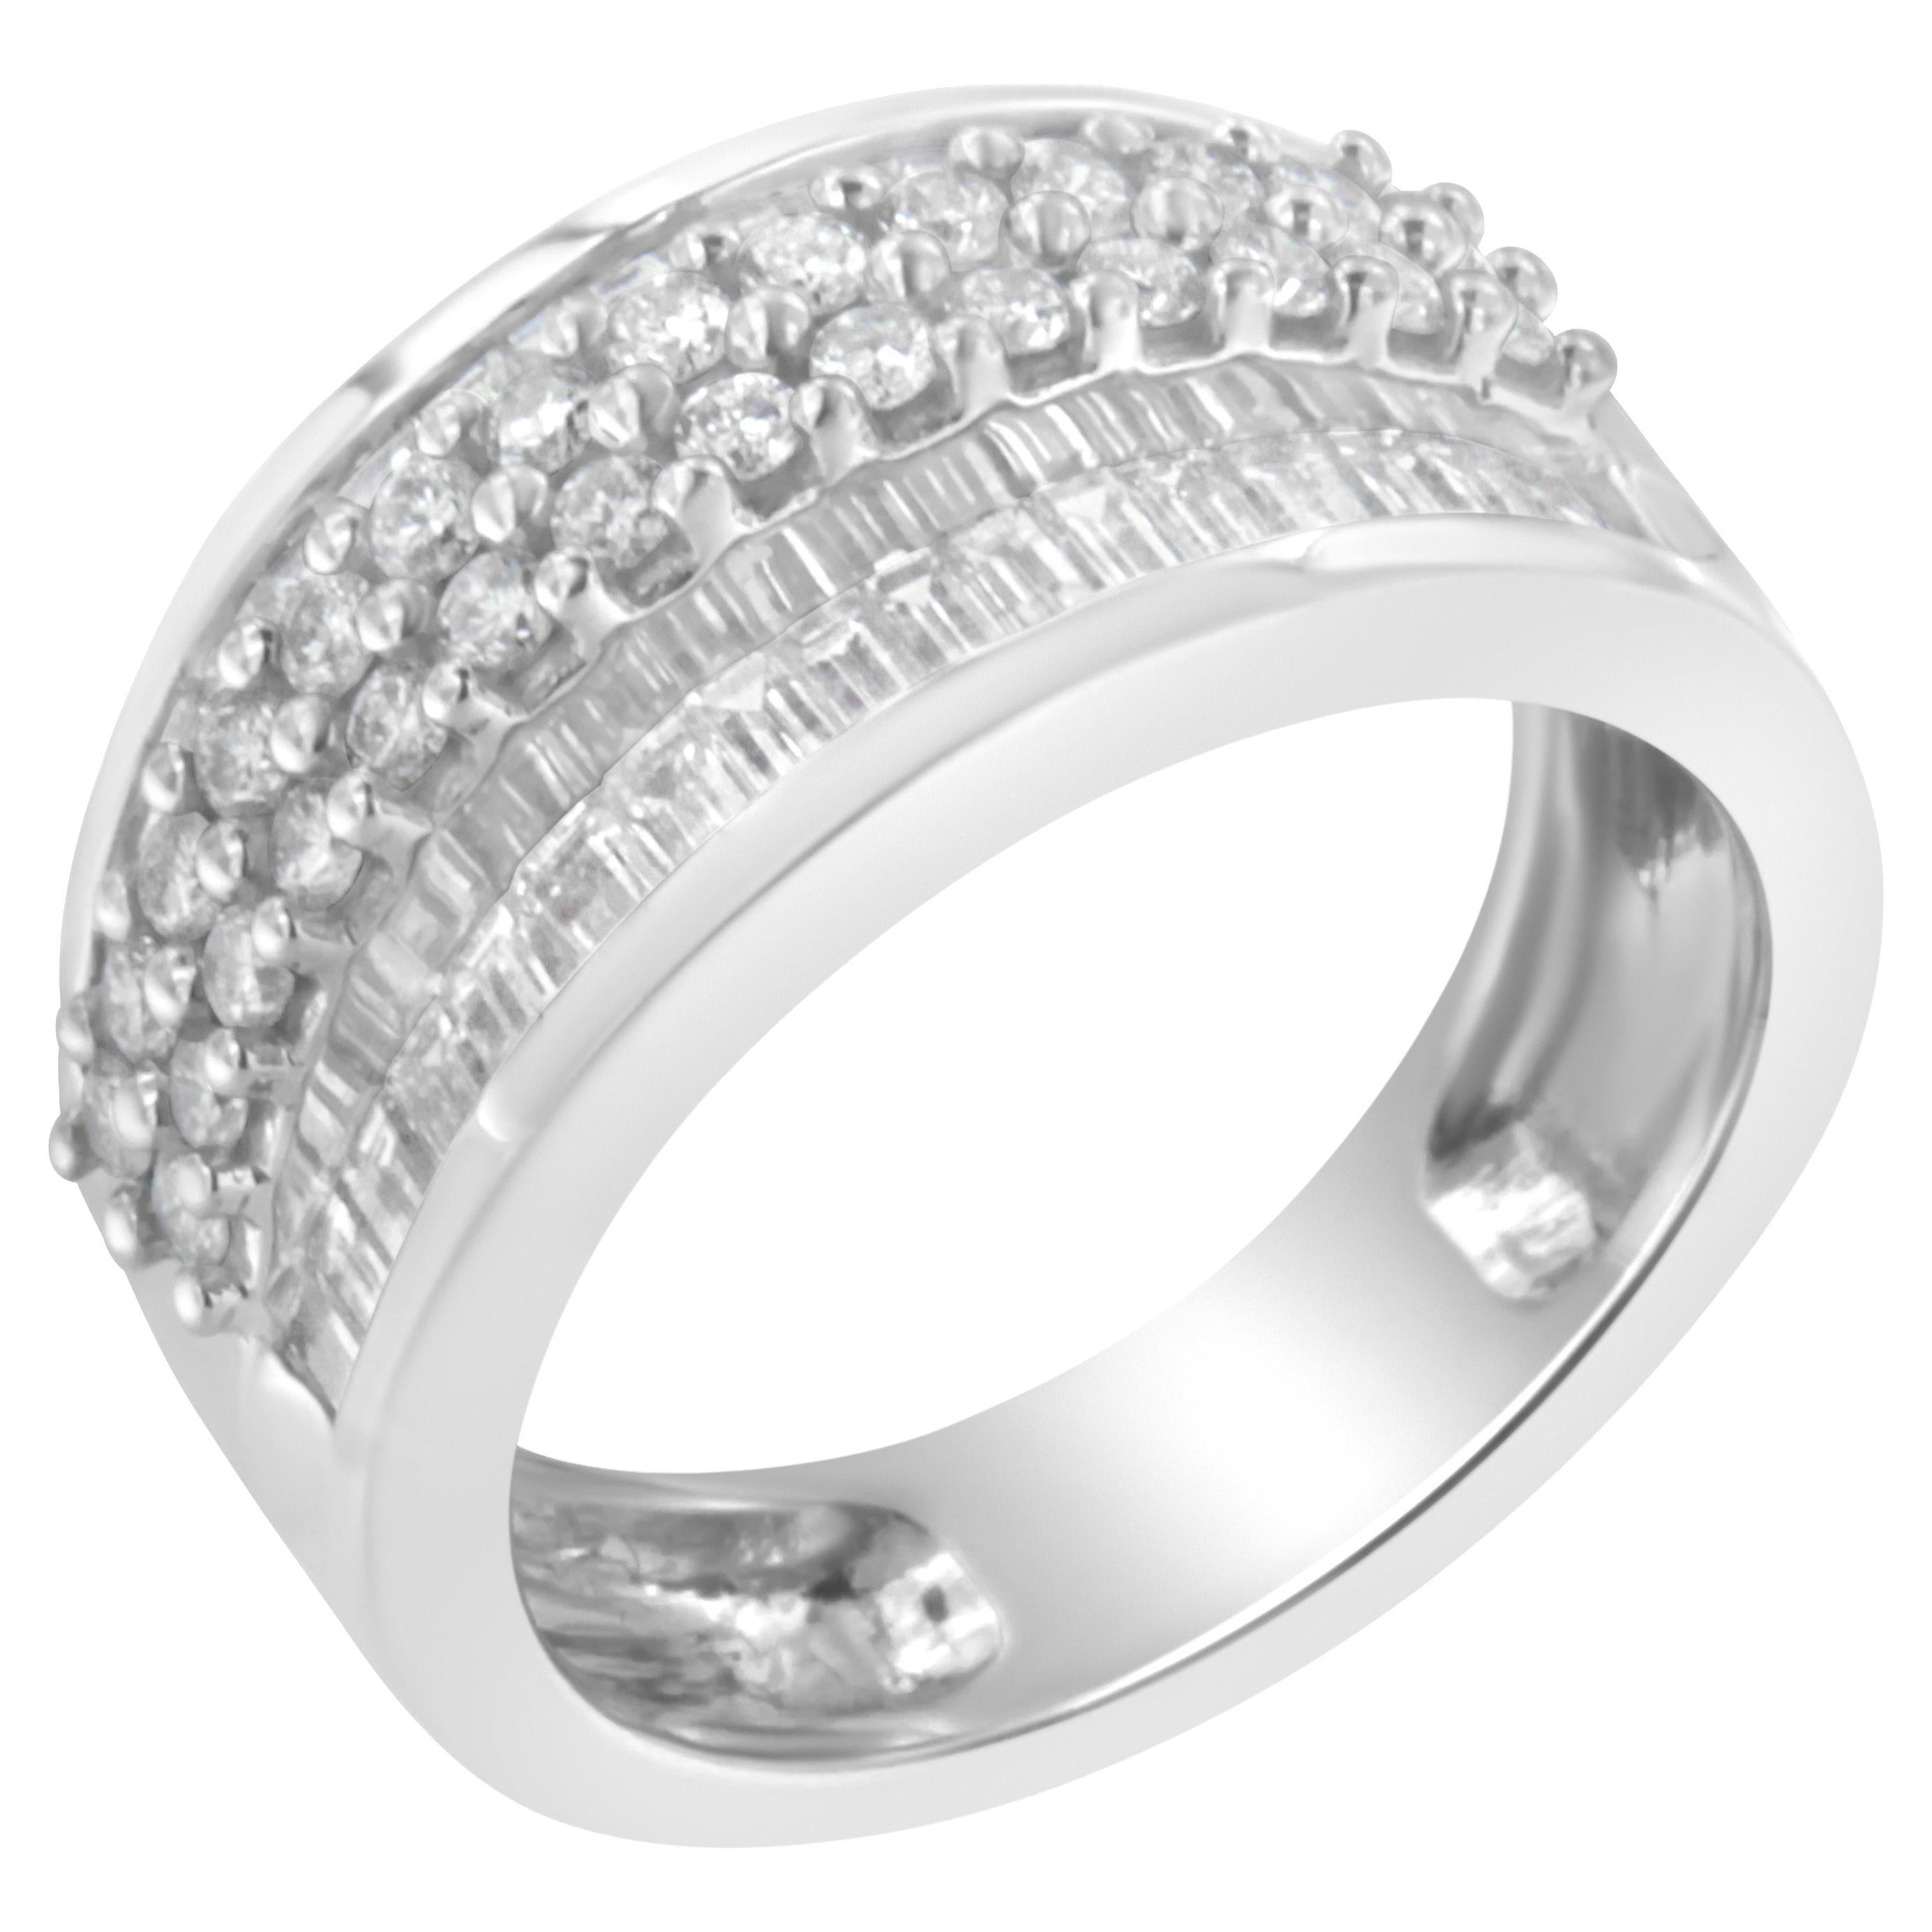 14K White Gold 1 1/2 Carat Round and Baguette Diamond Ring